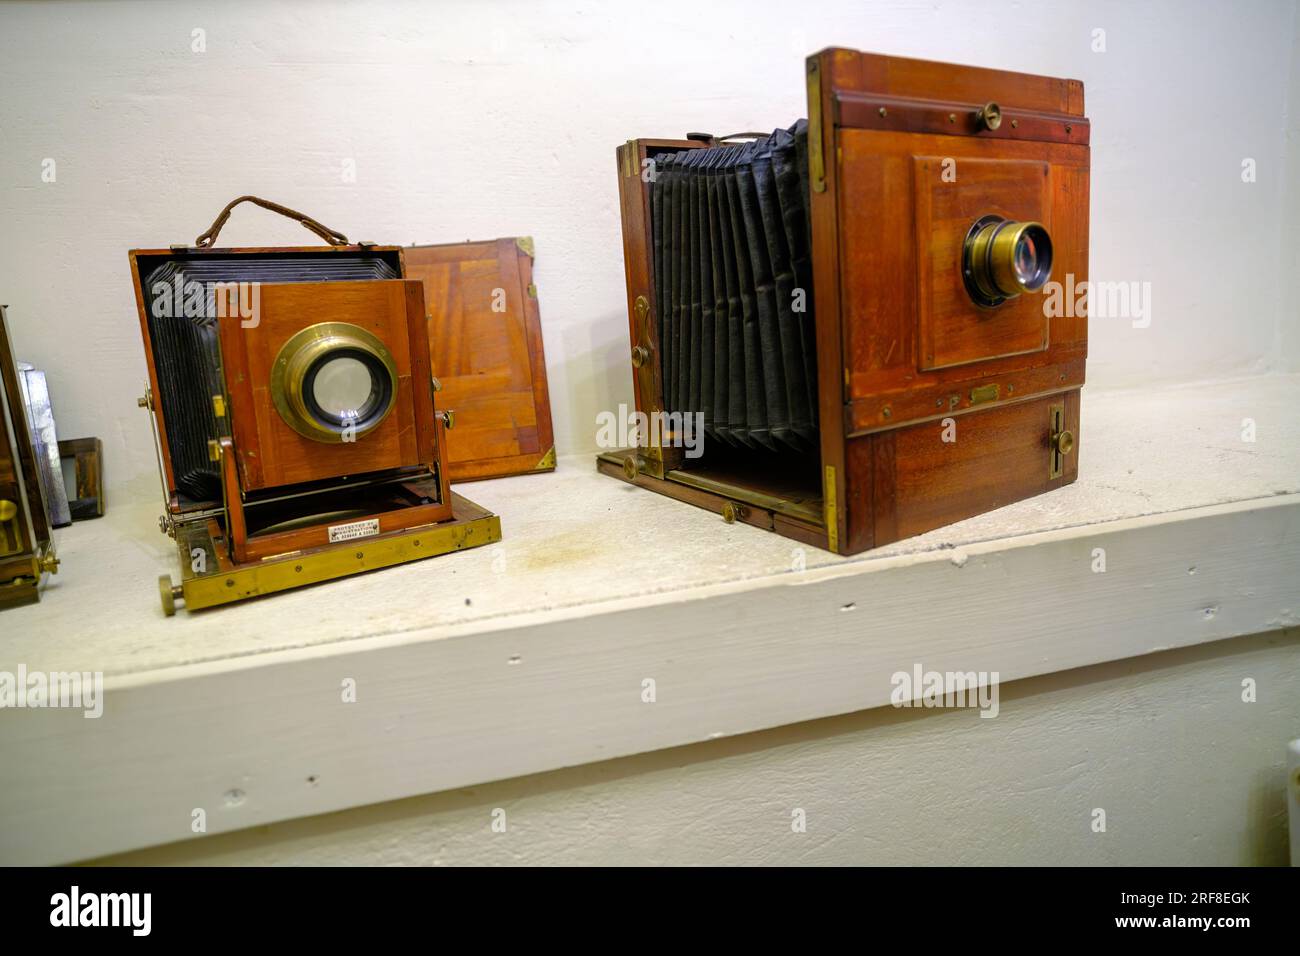 A very old camera on a shelf. Camera in working order. Assembled on a white wall shelf Stock Photo